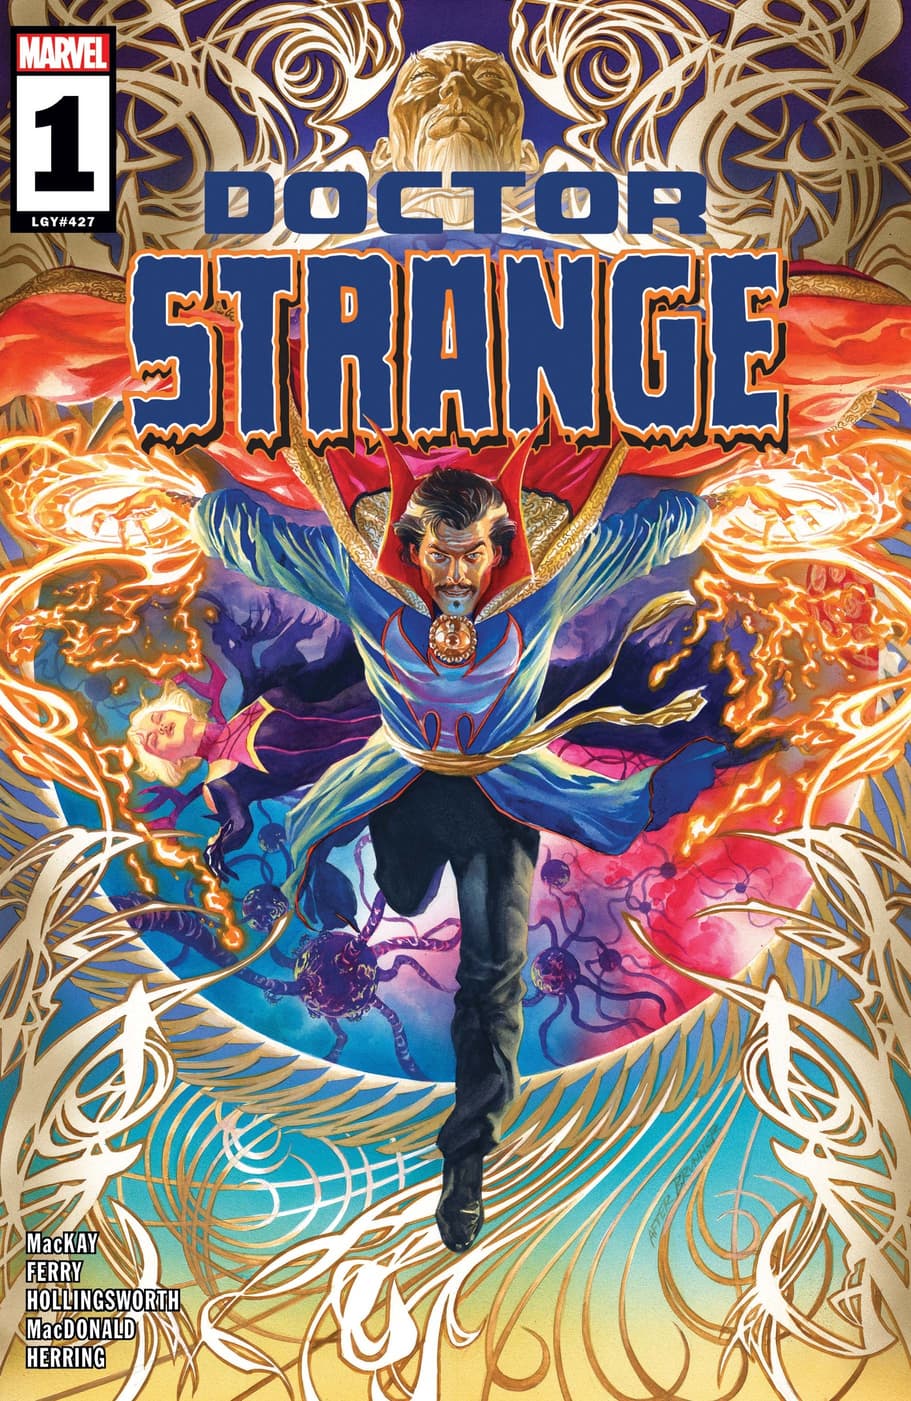 Cover to DOCTOR STRANGE (2023) #1 by Alex Ross.